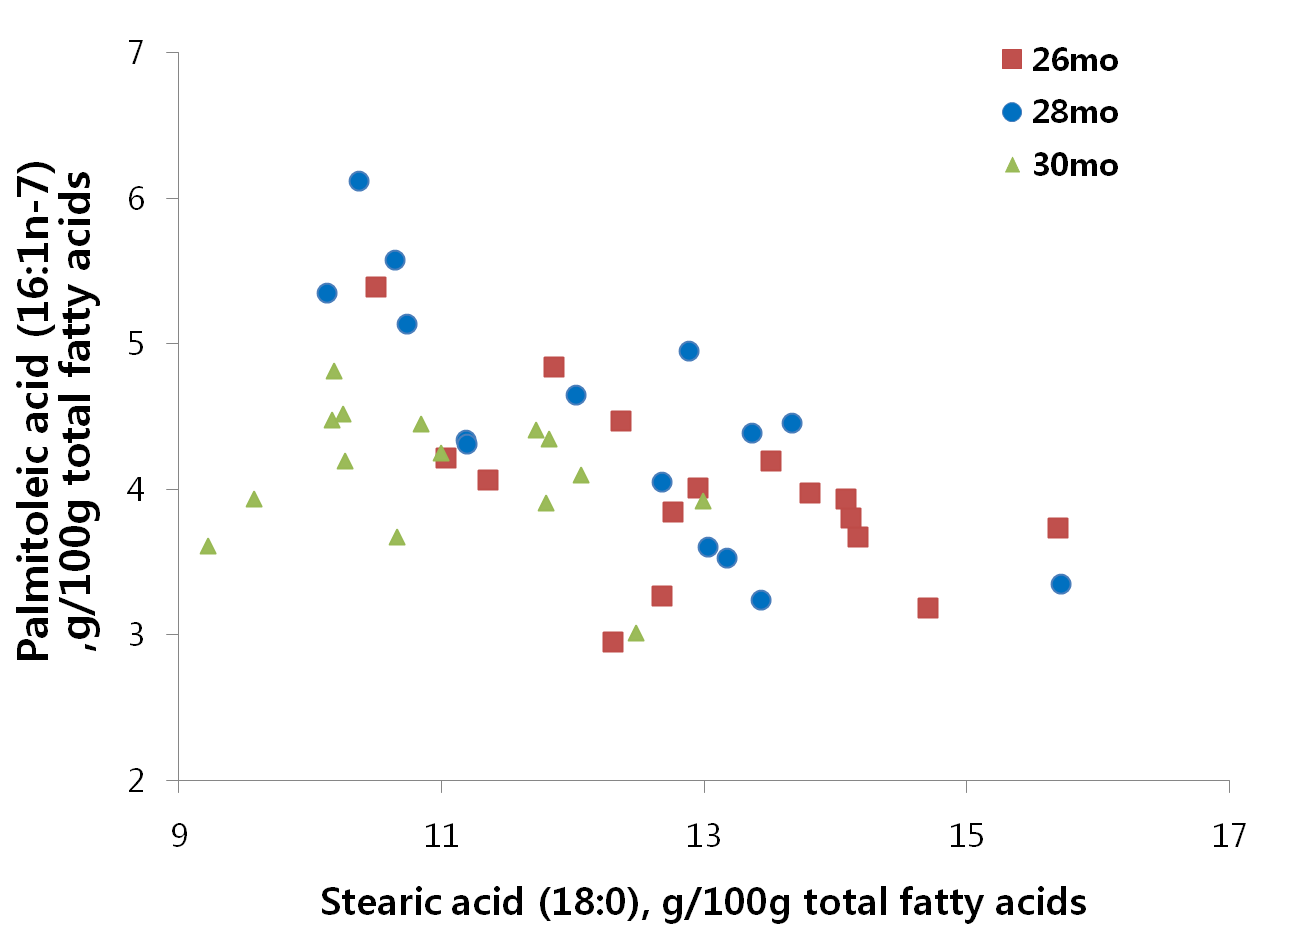 Palmitoleic acid (16:1n-7) as a function of stearic acid (18:0) in intramuscular adipose tissue of Hanwoo steers fed high-energy diet to three different endpoints.